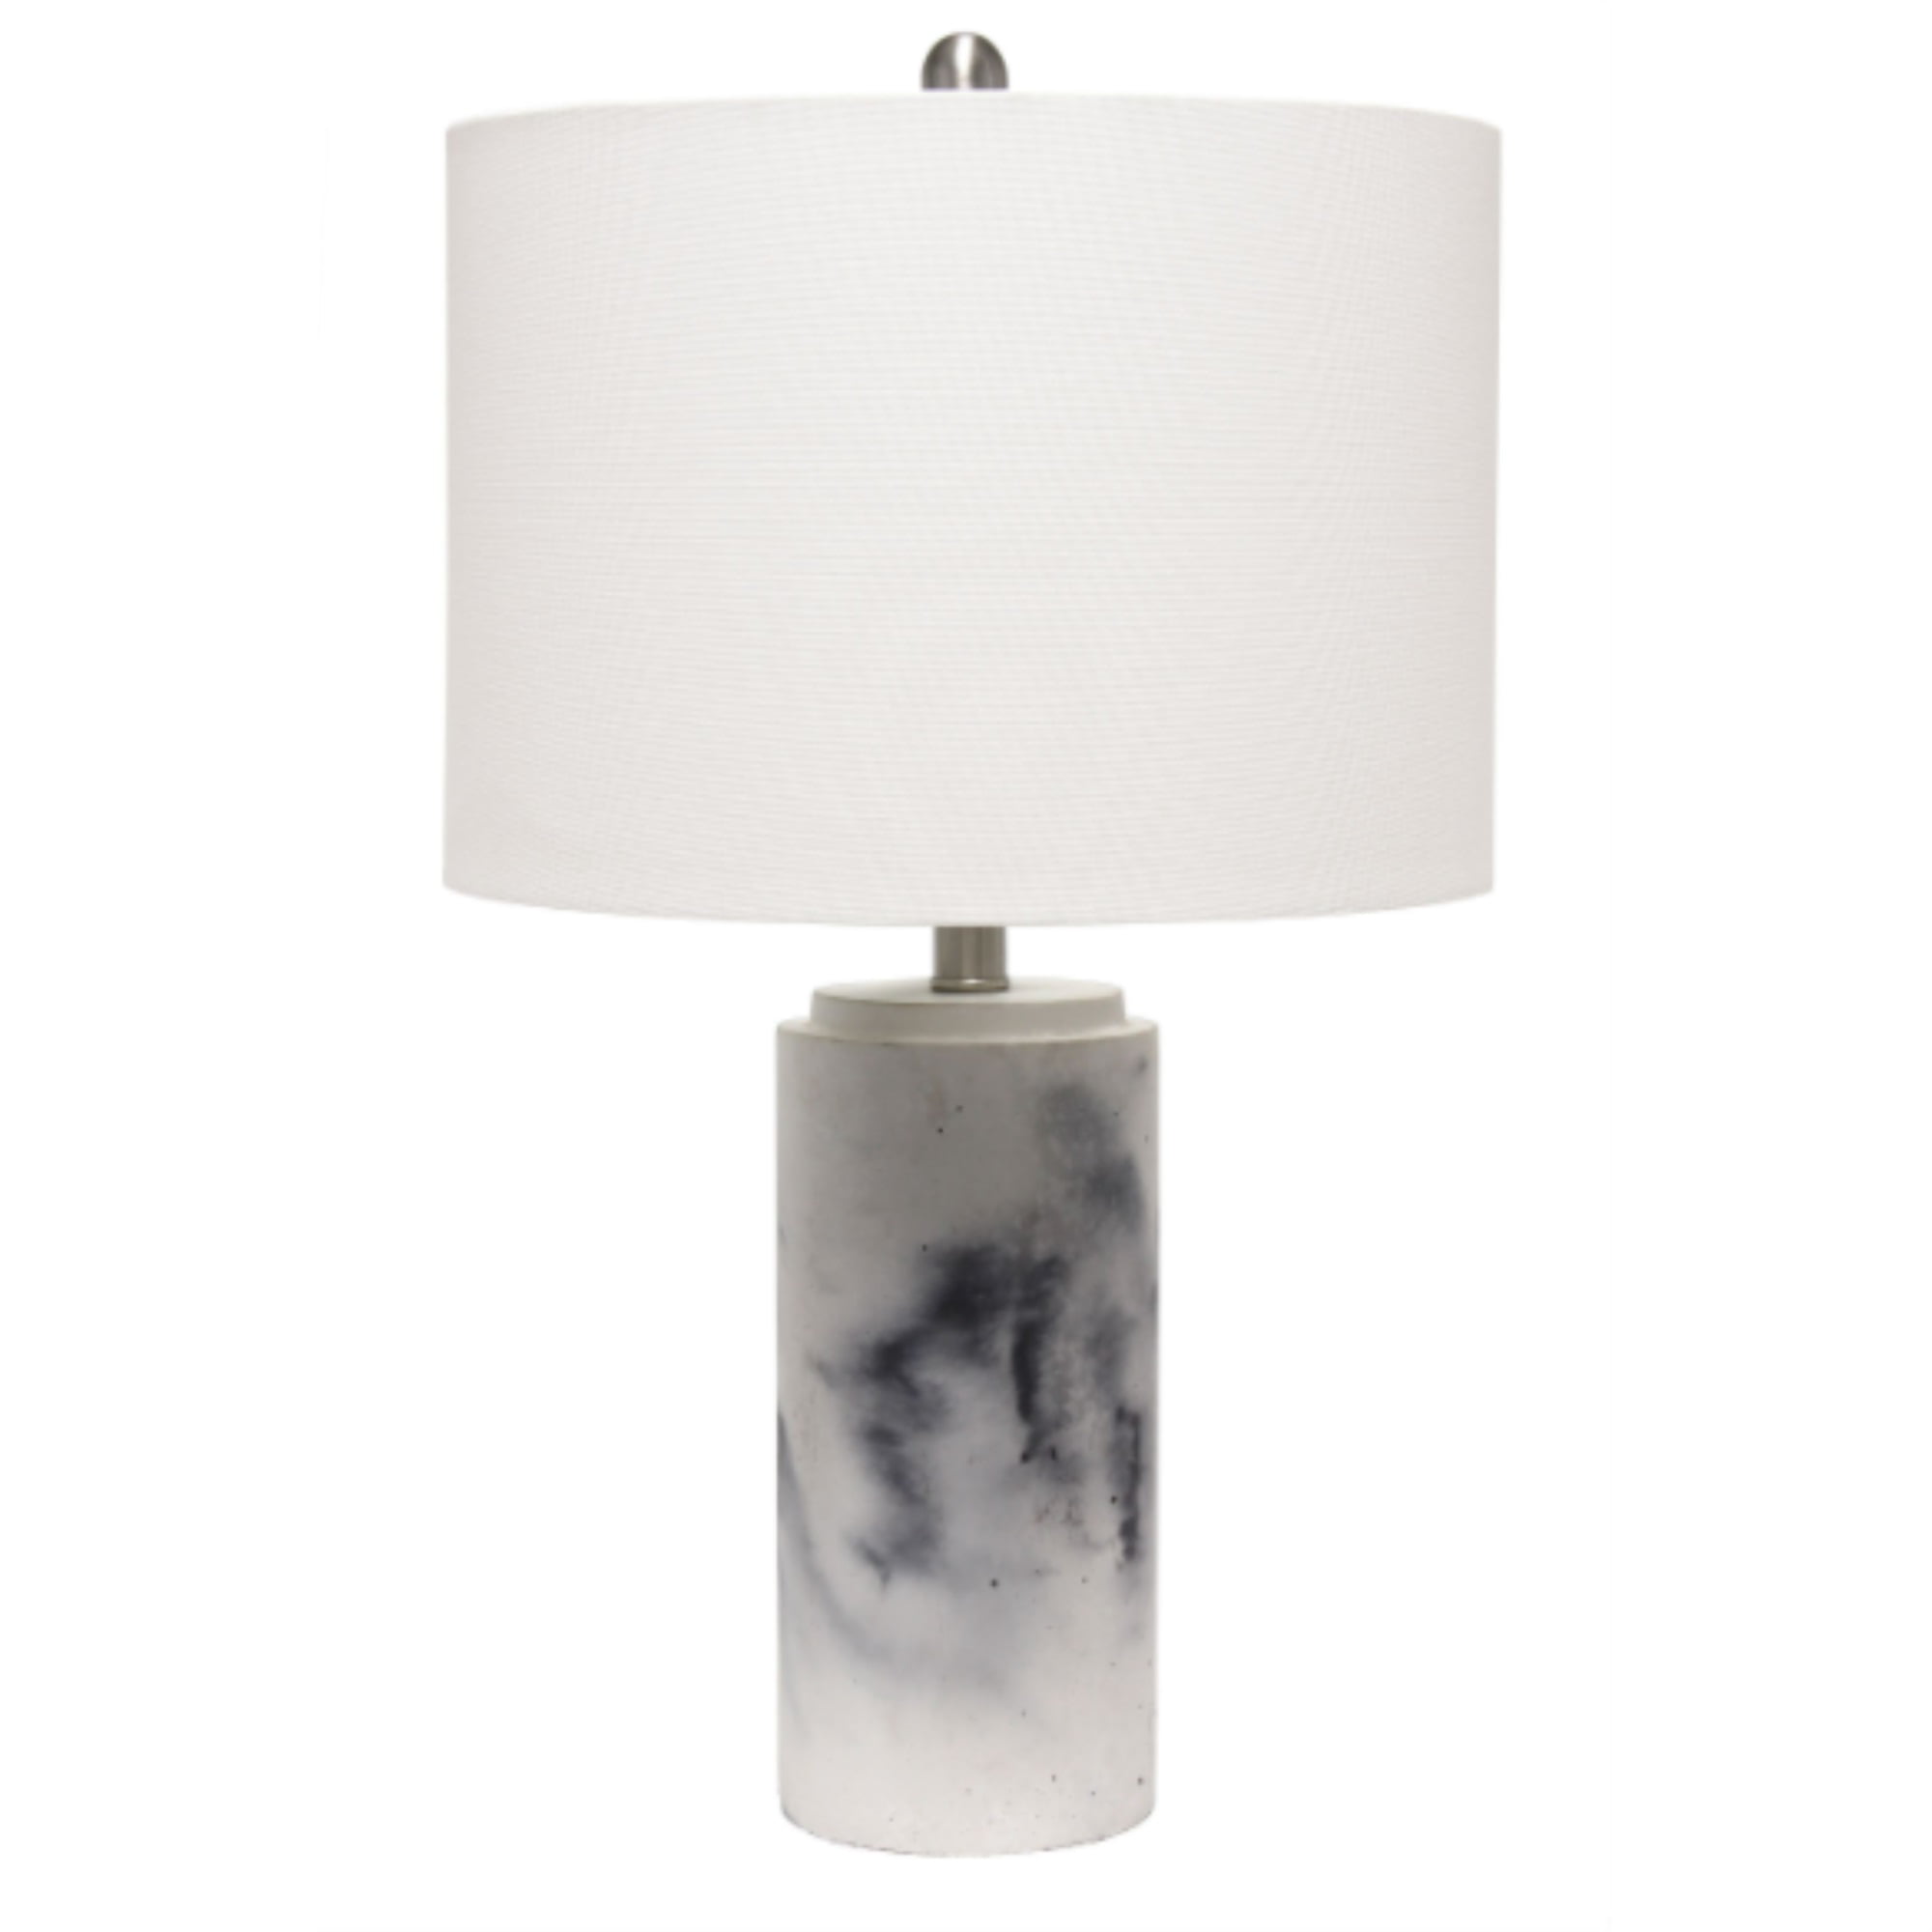 Lalia Home Marbleized Table Lamp with White Fabric Shade, White